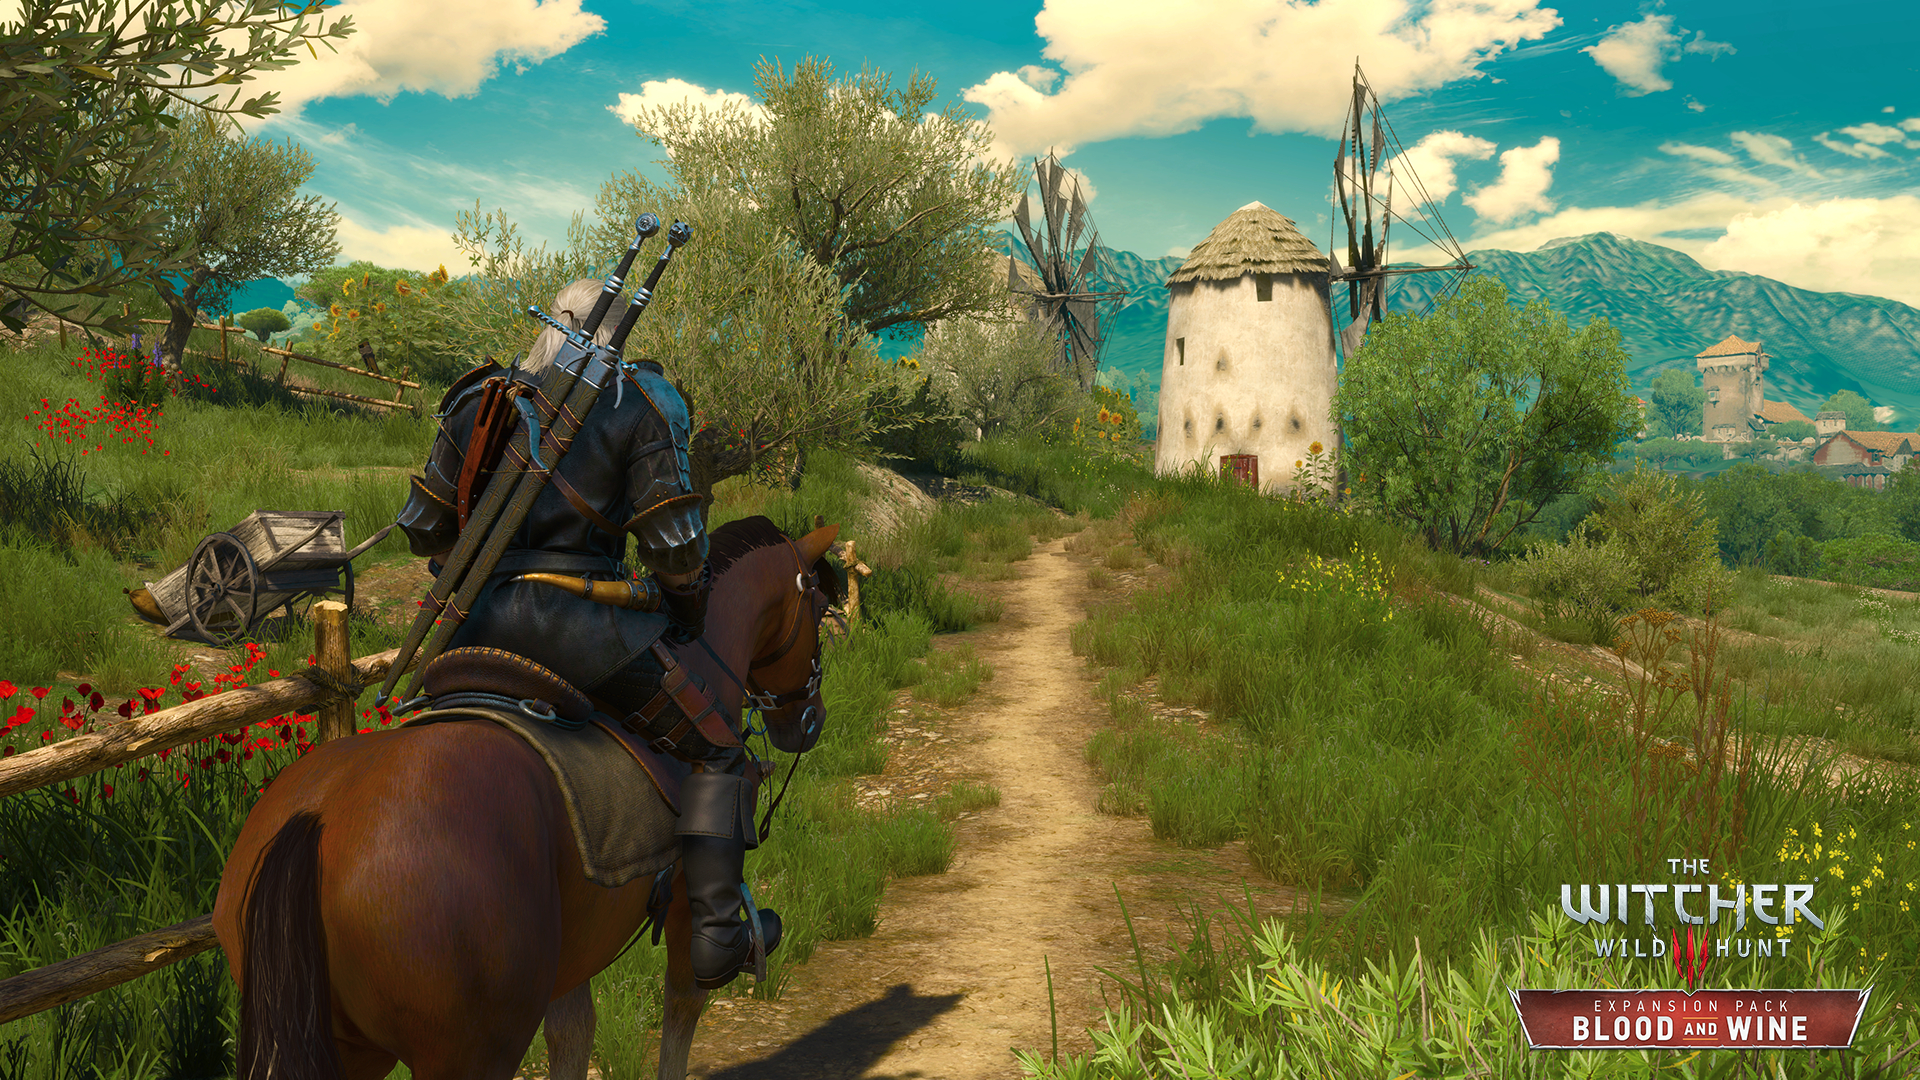 The witcher 3 blood wine soundtrack blood and wine фото 105